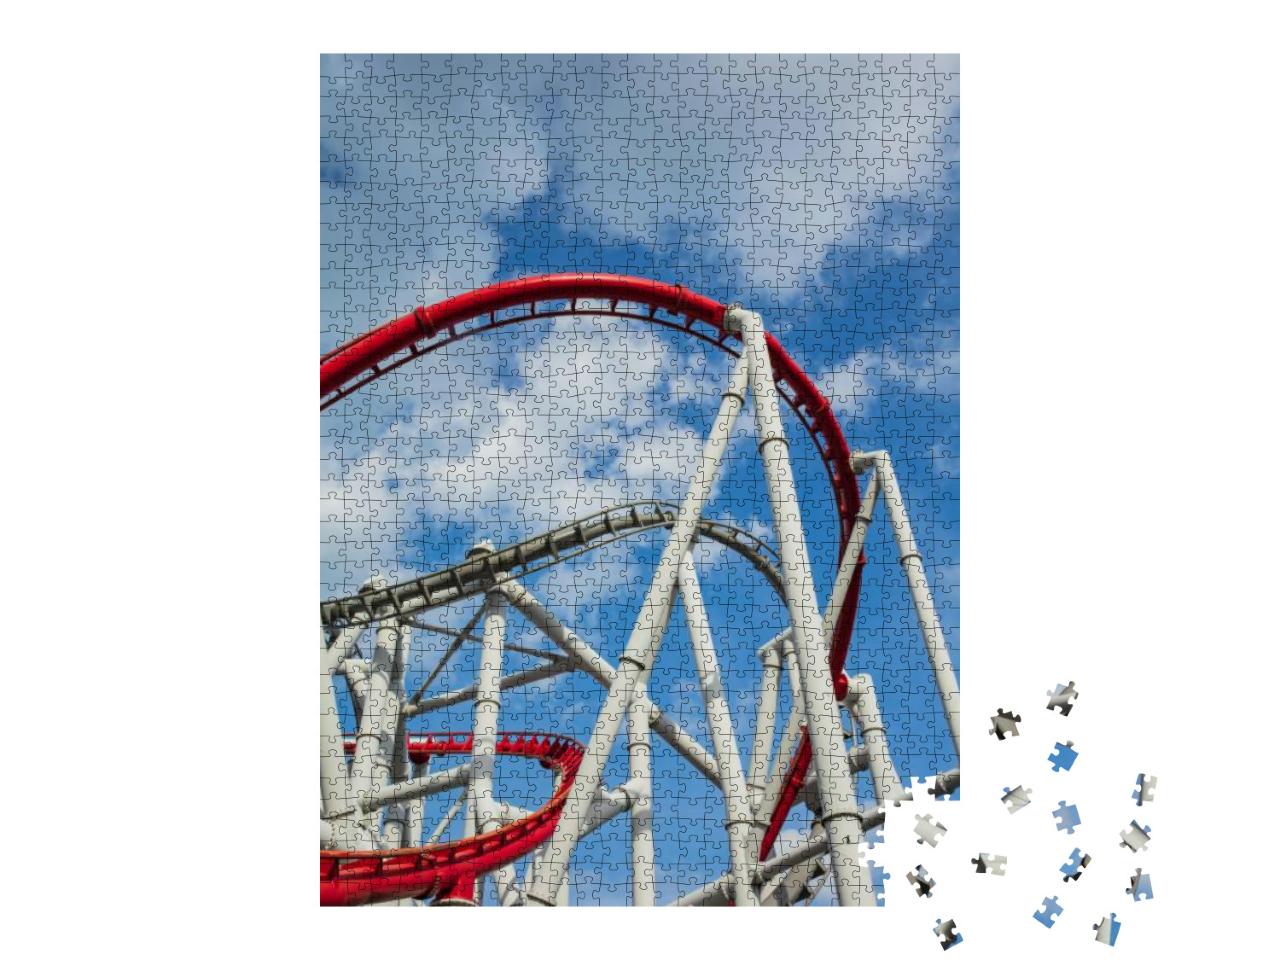 Roller Coaster on Sky Background... Jigsaw Puzzle with 1000 pieces